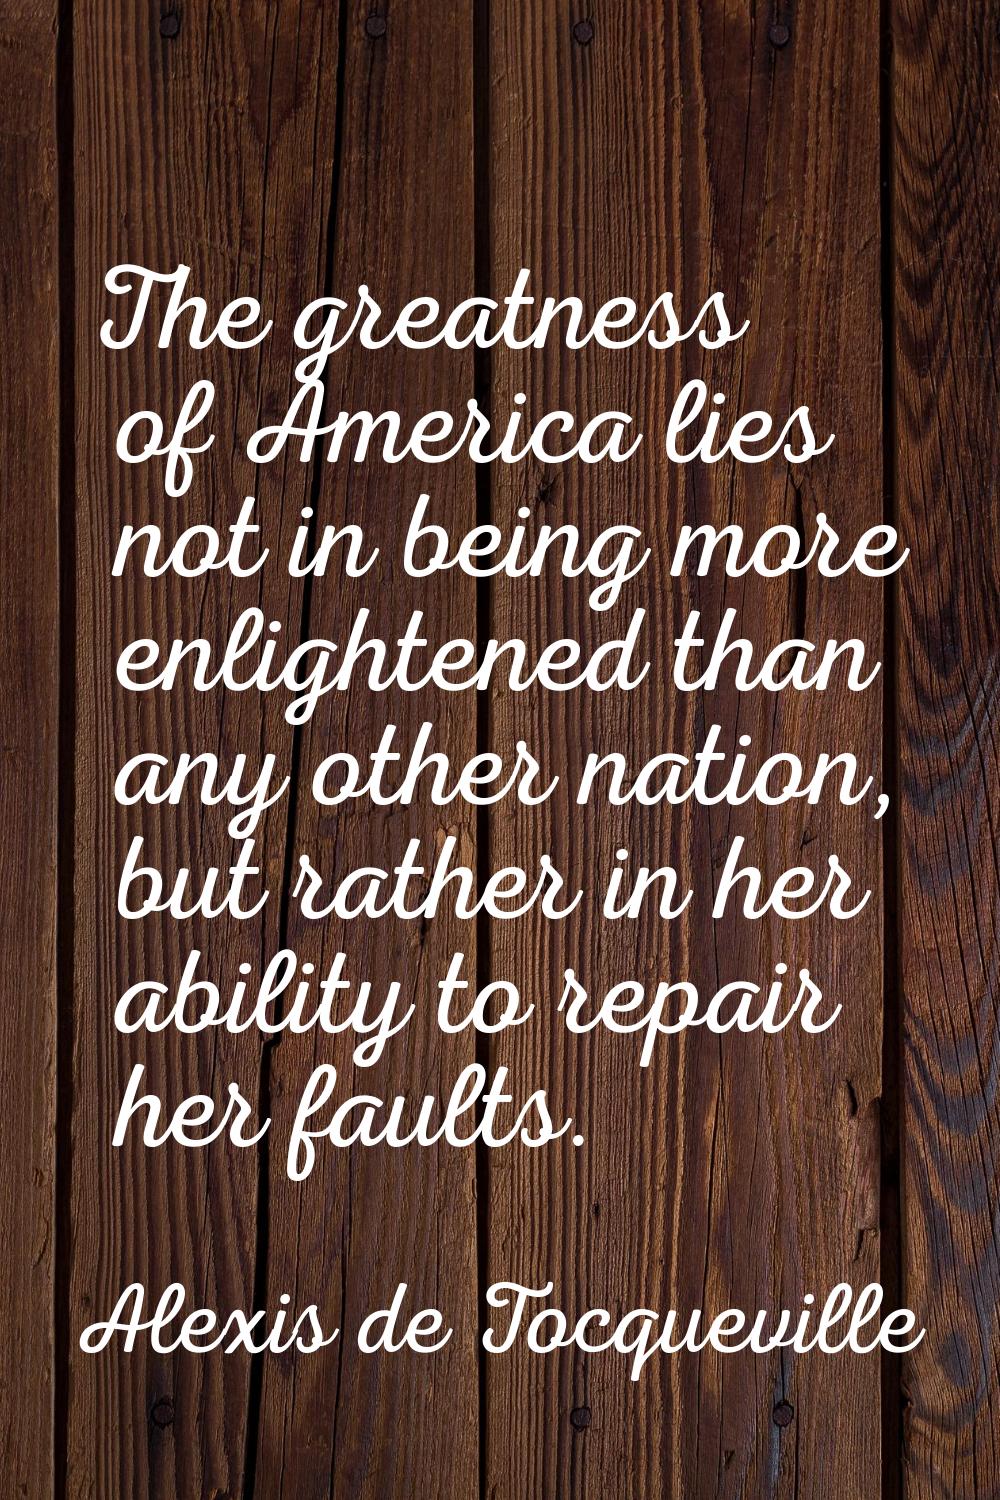 The greatness of America lies not in being more enlightened than any other nation, but rather in he